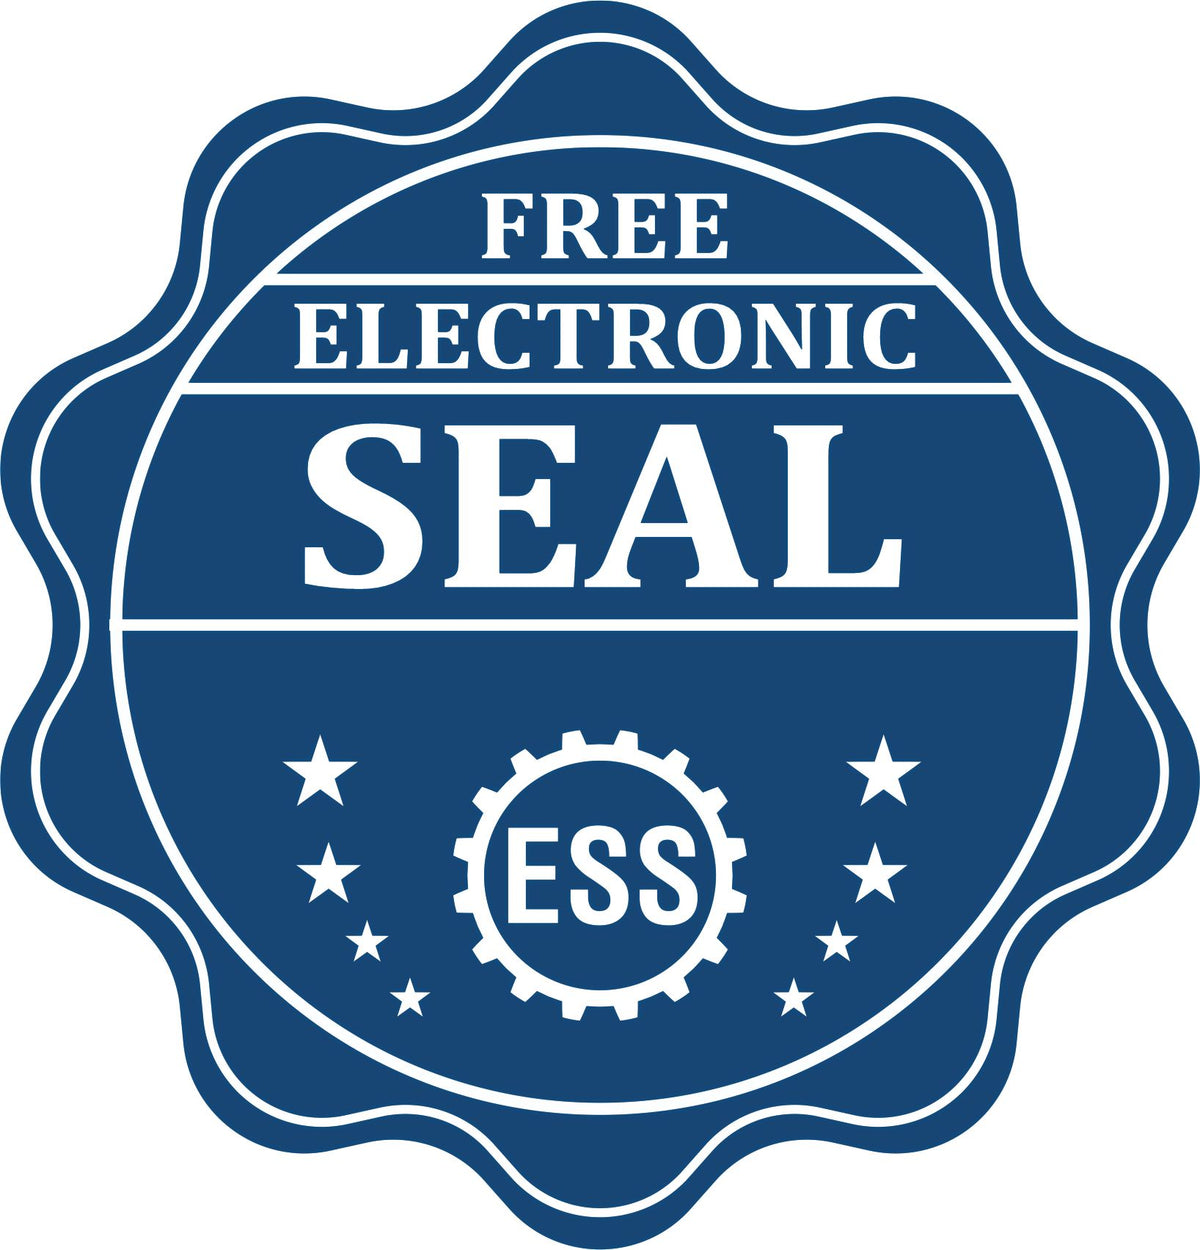 A badge showing a free electronic seal for the State of California Extended Long Reach Engineer Seal with stars and the ESS gear on the emblem.